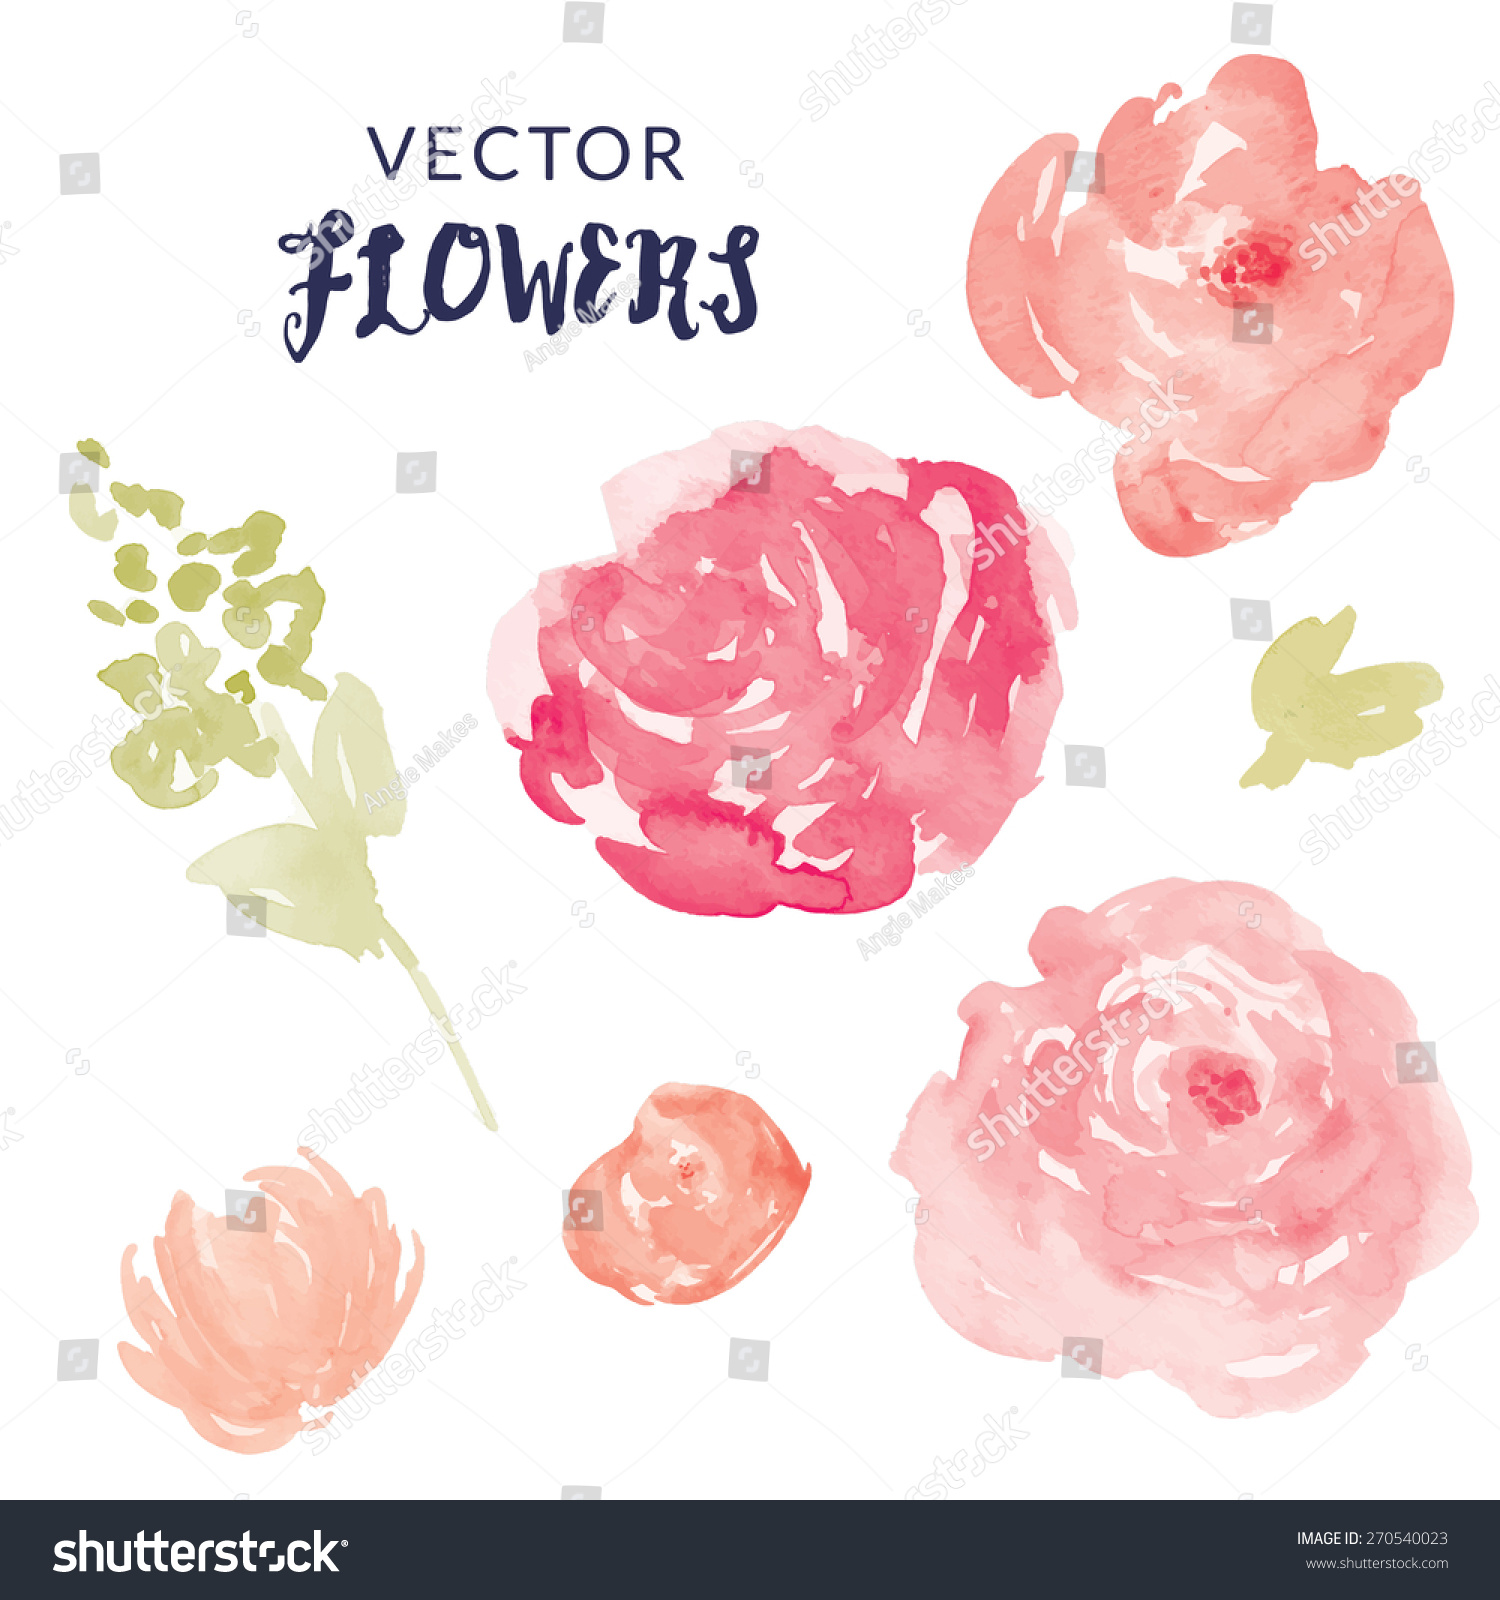 Watercolor Flower Vector With Blooms And Leaves. Pink Vector Watercolor ...